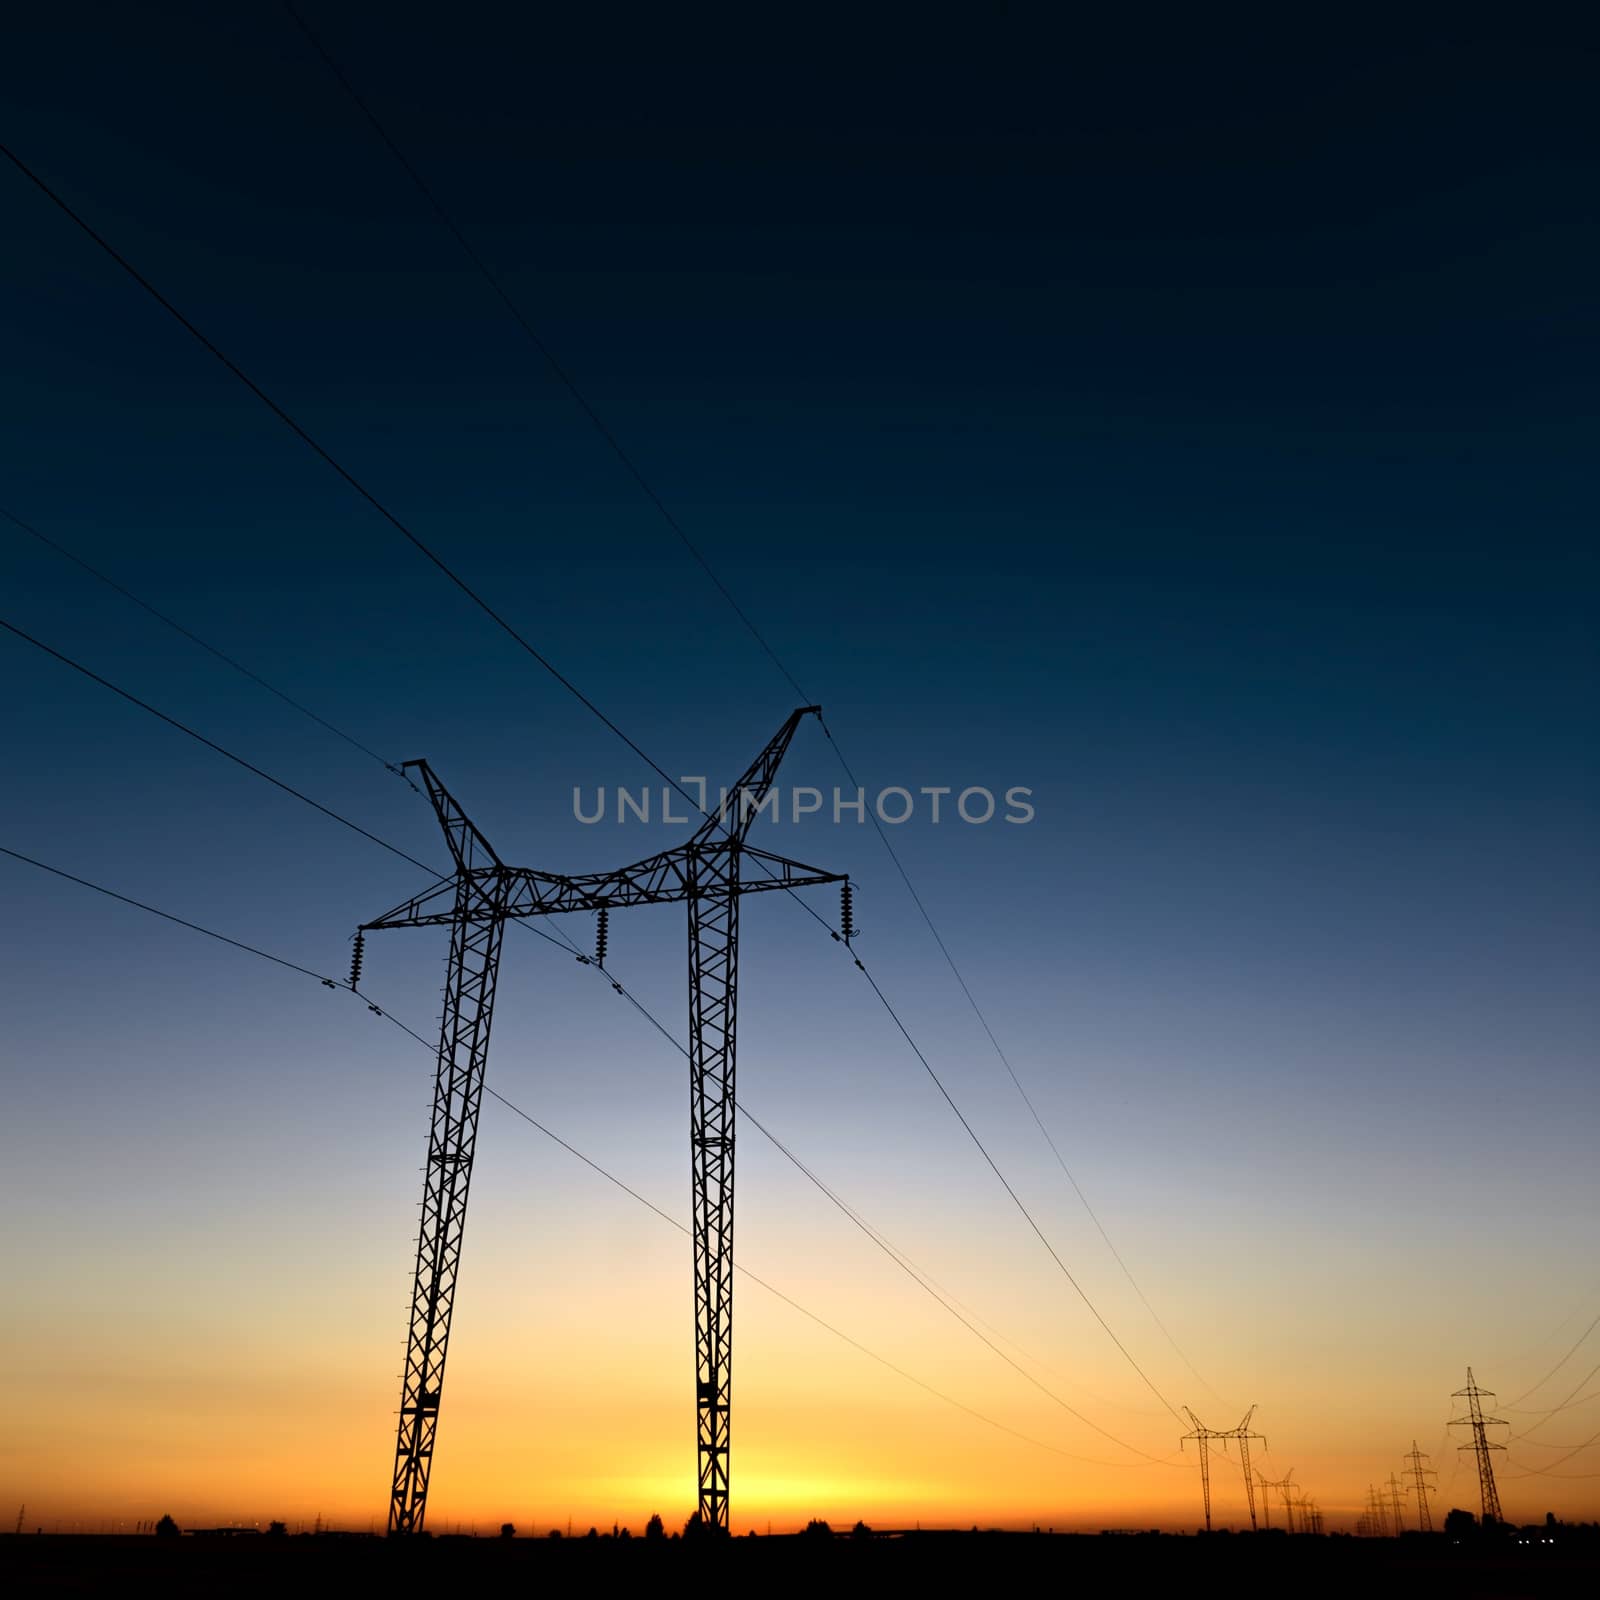 Large transmission towers at blue hour  by svedoliver